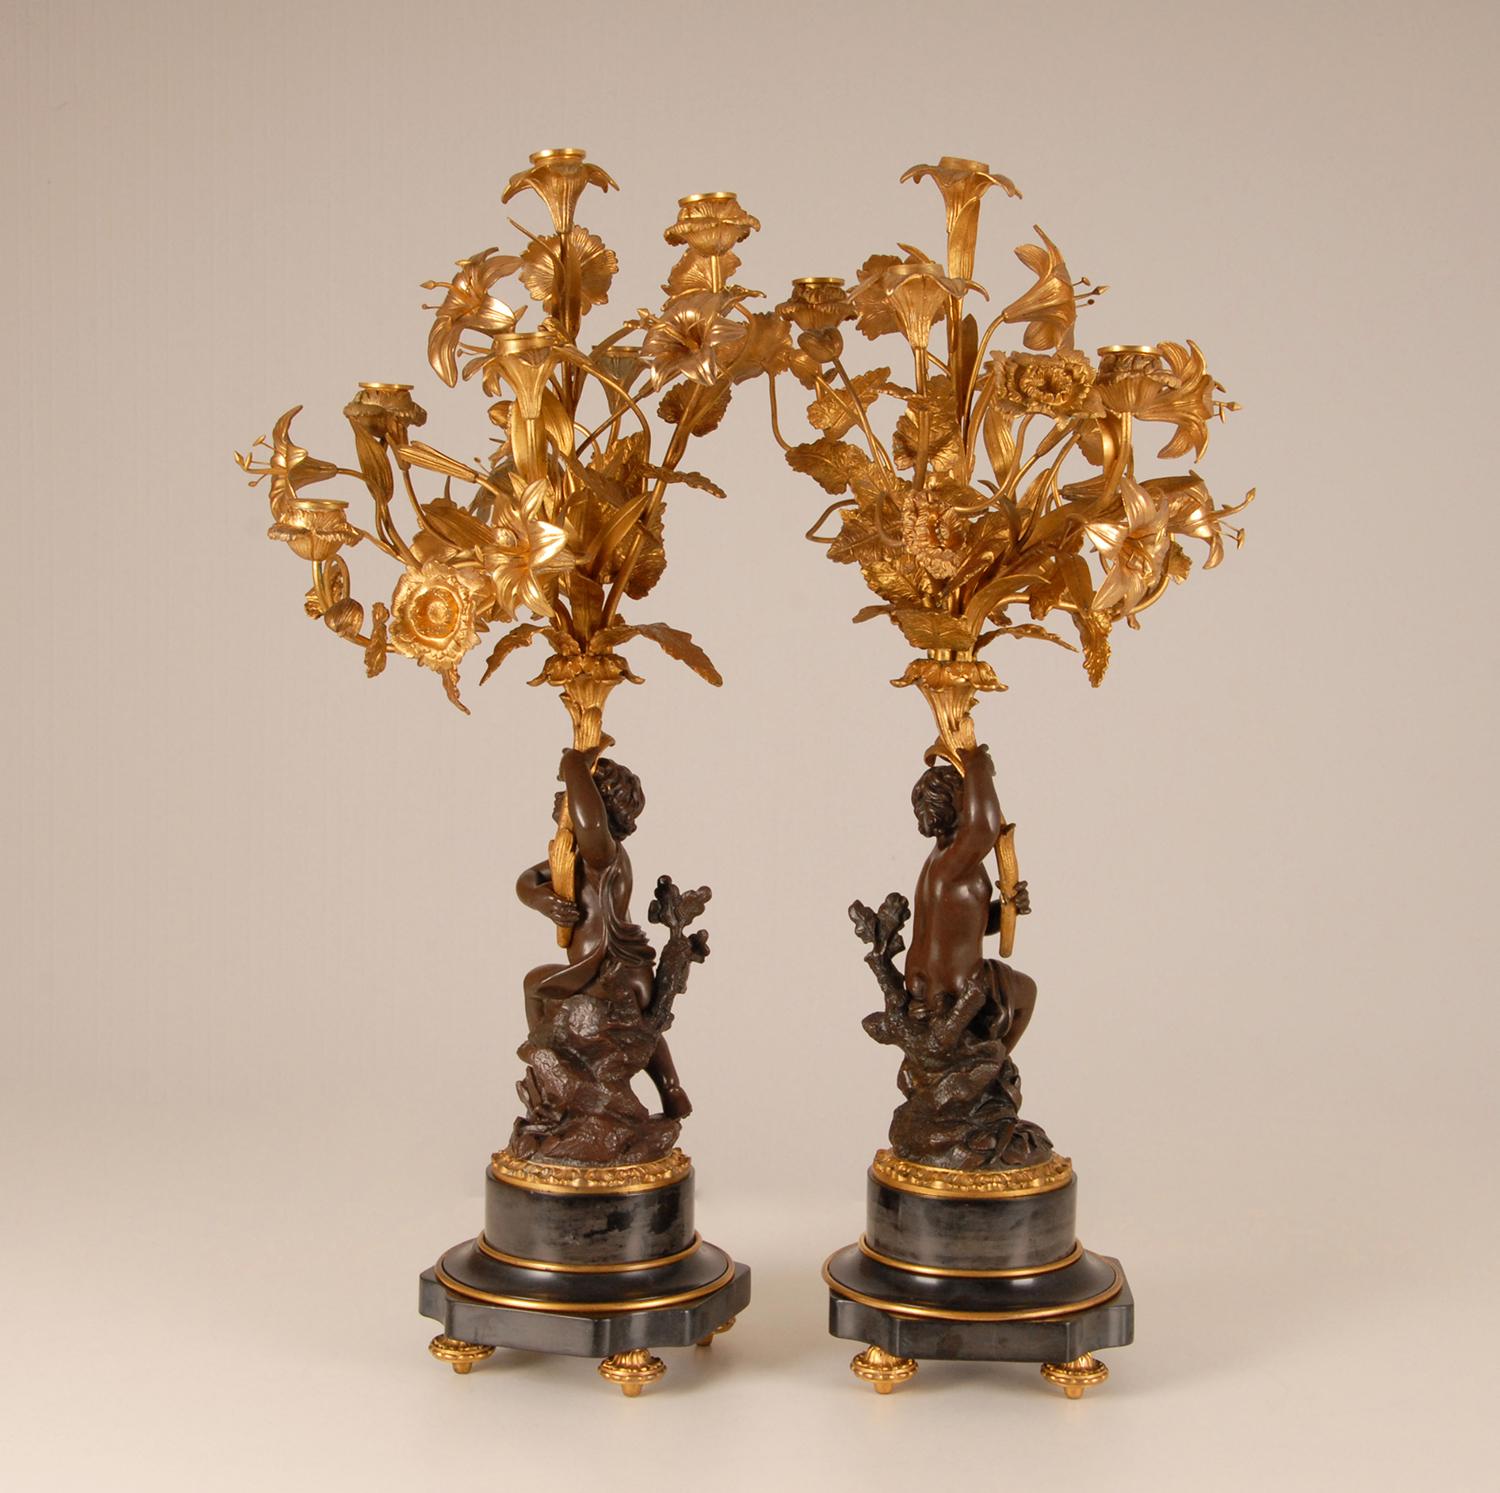 Cast Victorian French Gold Gilded Bronze Putto and Flowers Candelabras on Marble Base